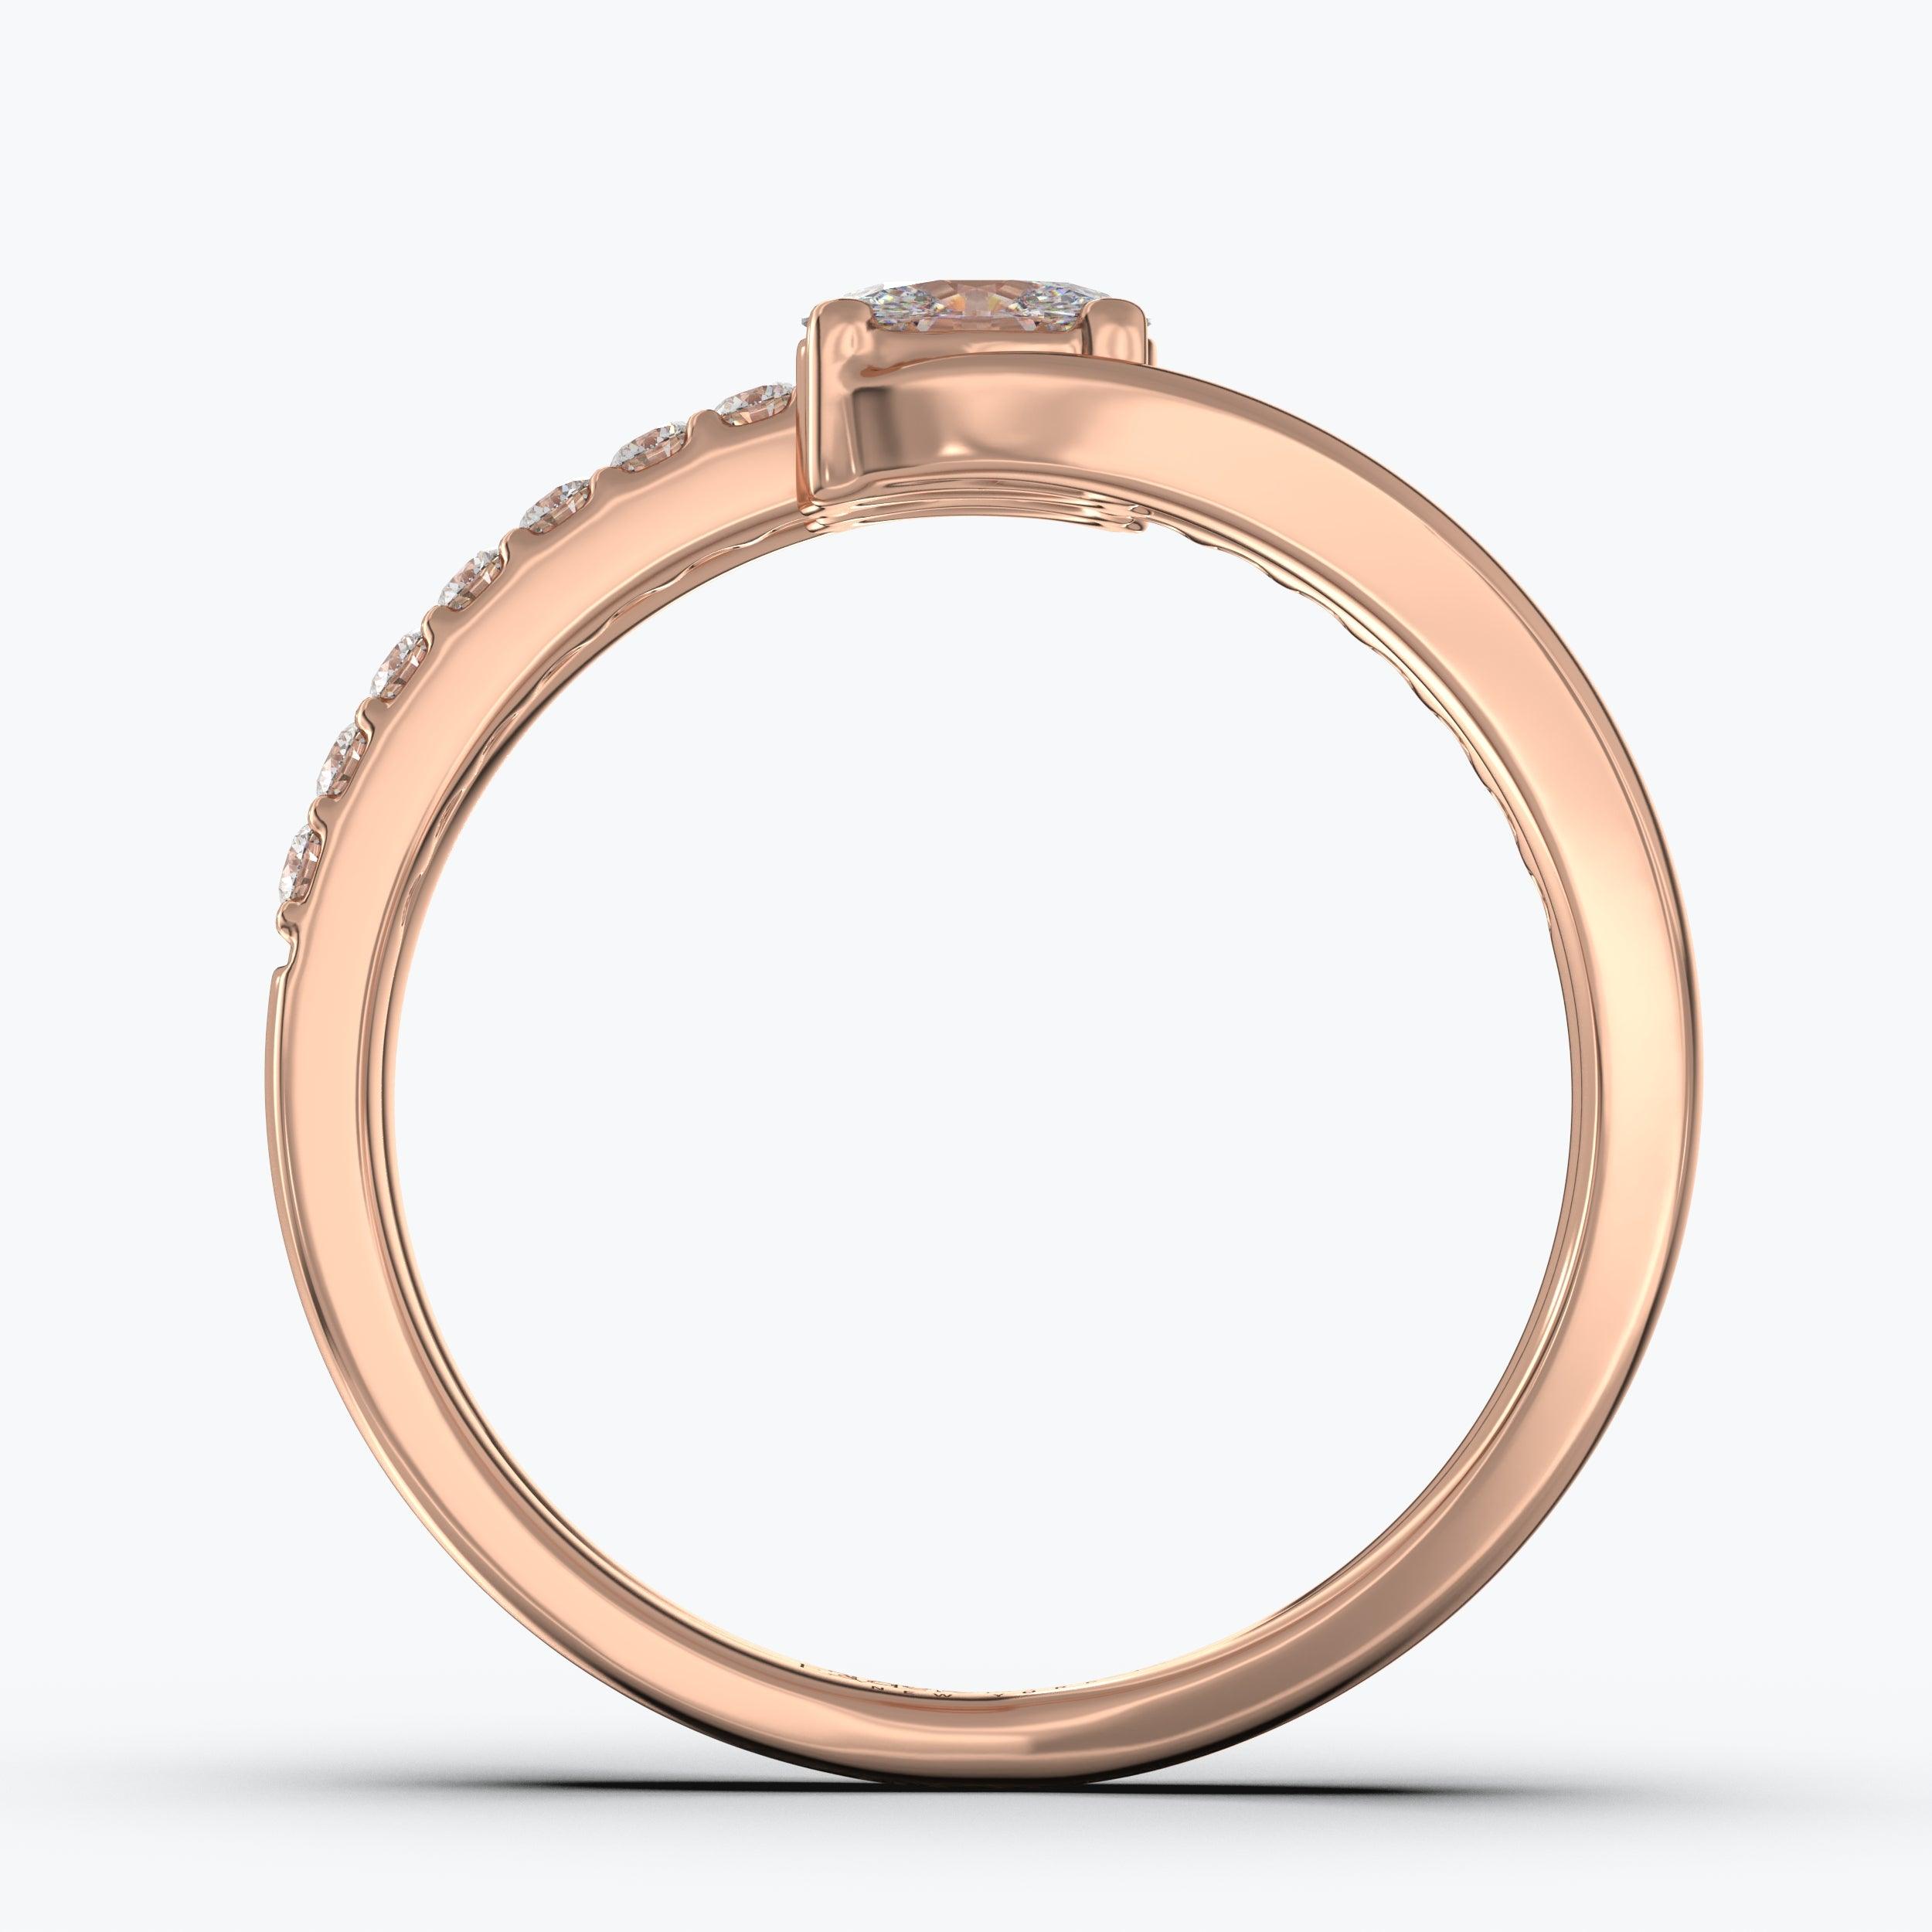 The Akin Oval Cut - Rose Gold / 0.5 ct - Evermore Diamonds